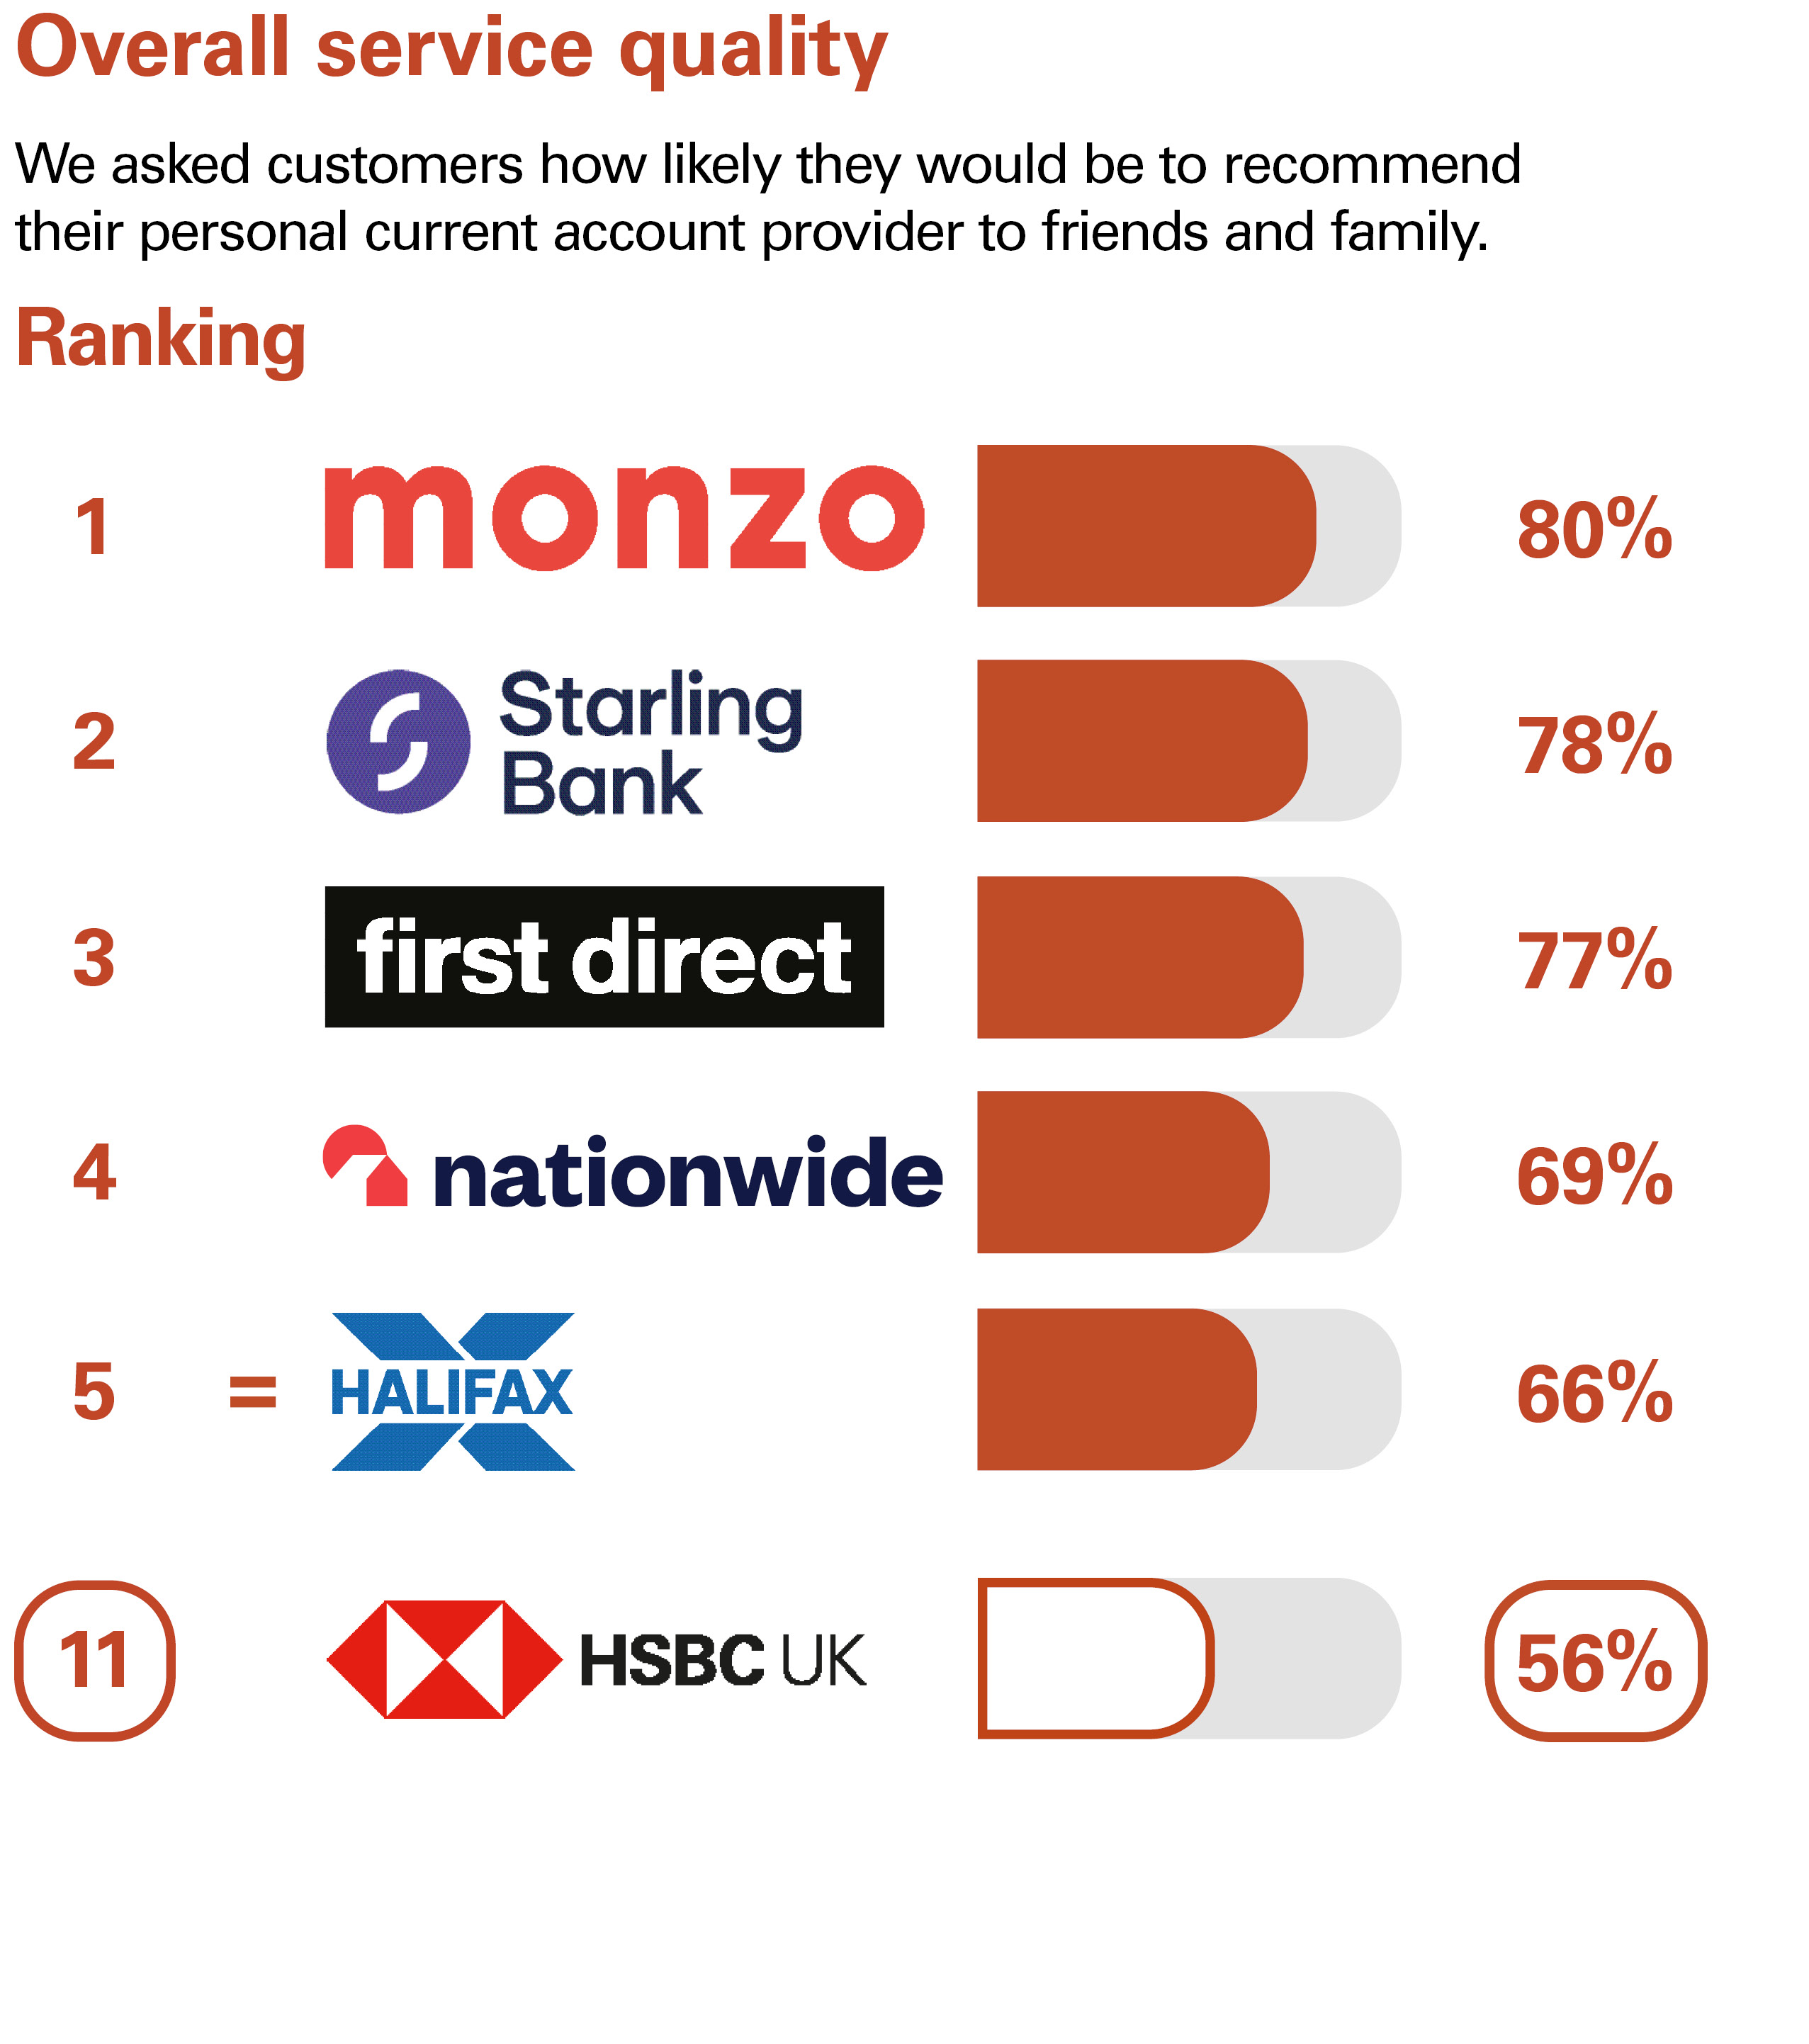 Overall Service Quality. We asked customers how likely they would be to recommend their personal current account provider to friends and family. Ranking: 1 Monzo 80% 2 Starling bank 78% 3 first direct 77% 4 Nationwide 69% equal 5 Halifax 66% 11 HSBC UK 56%.